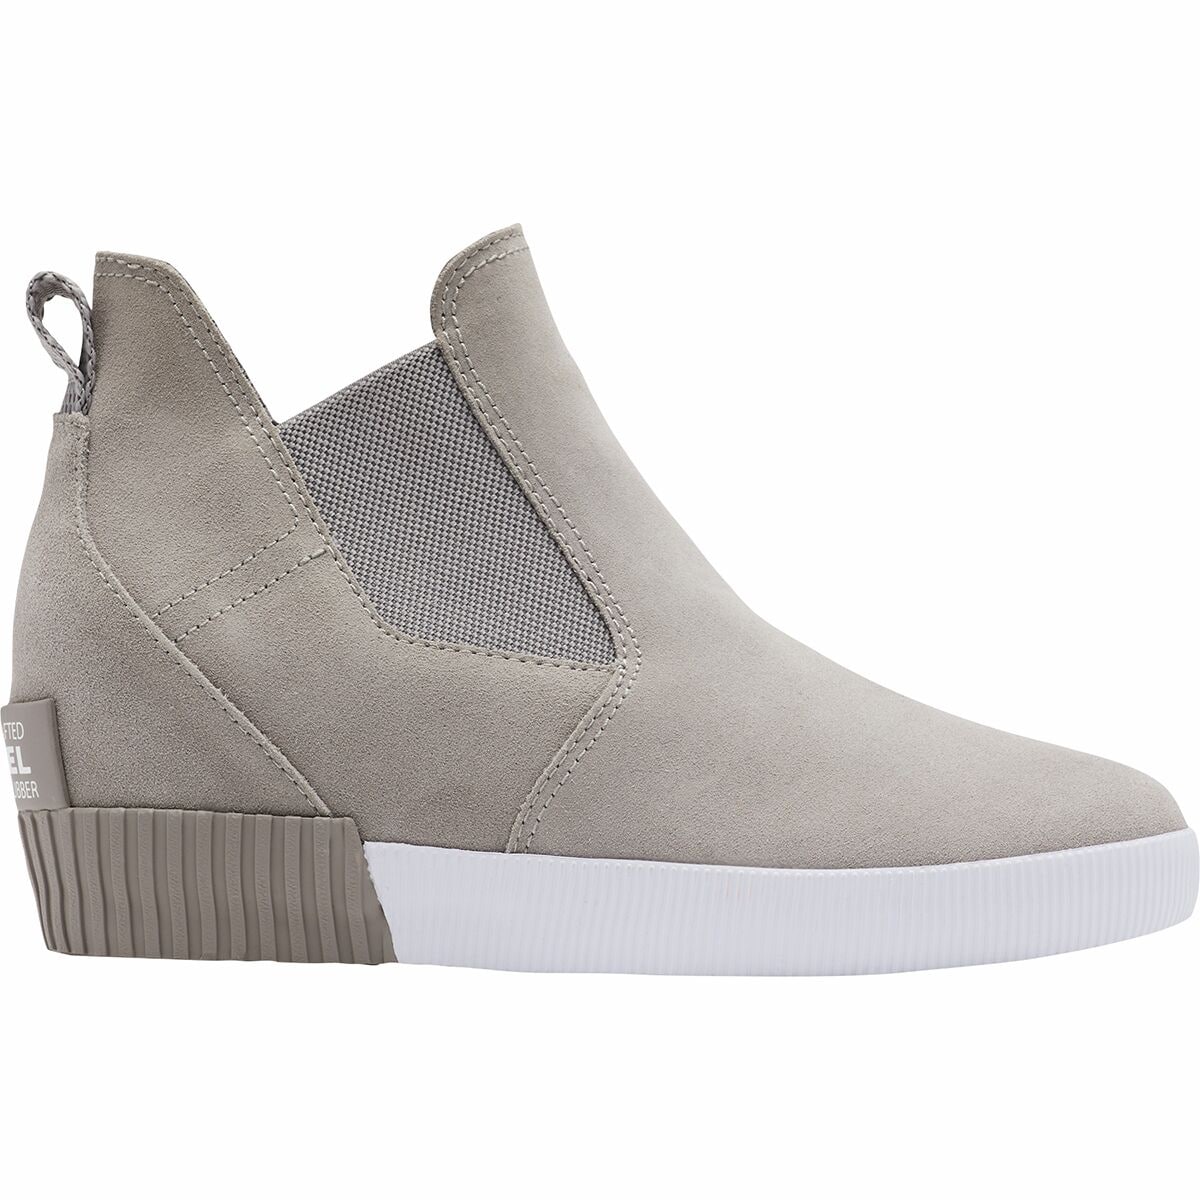 Out N About Slip-On Wedge Shoe - Women